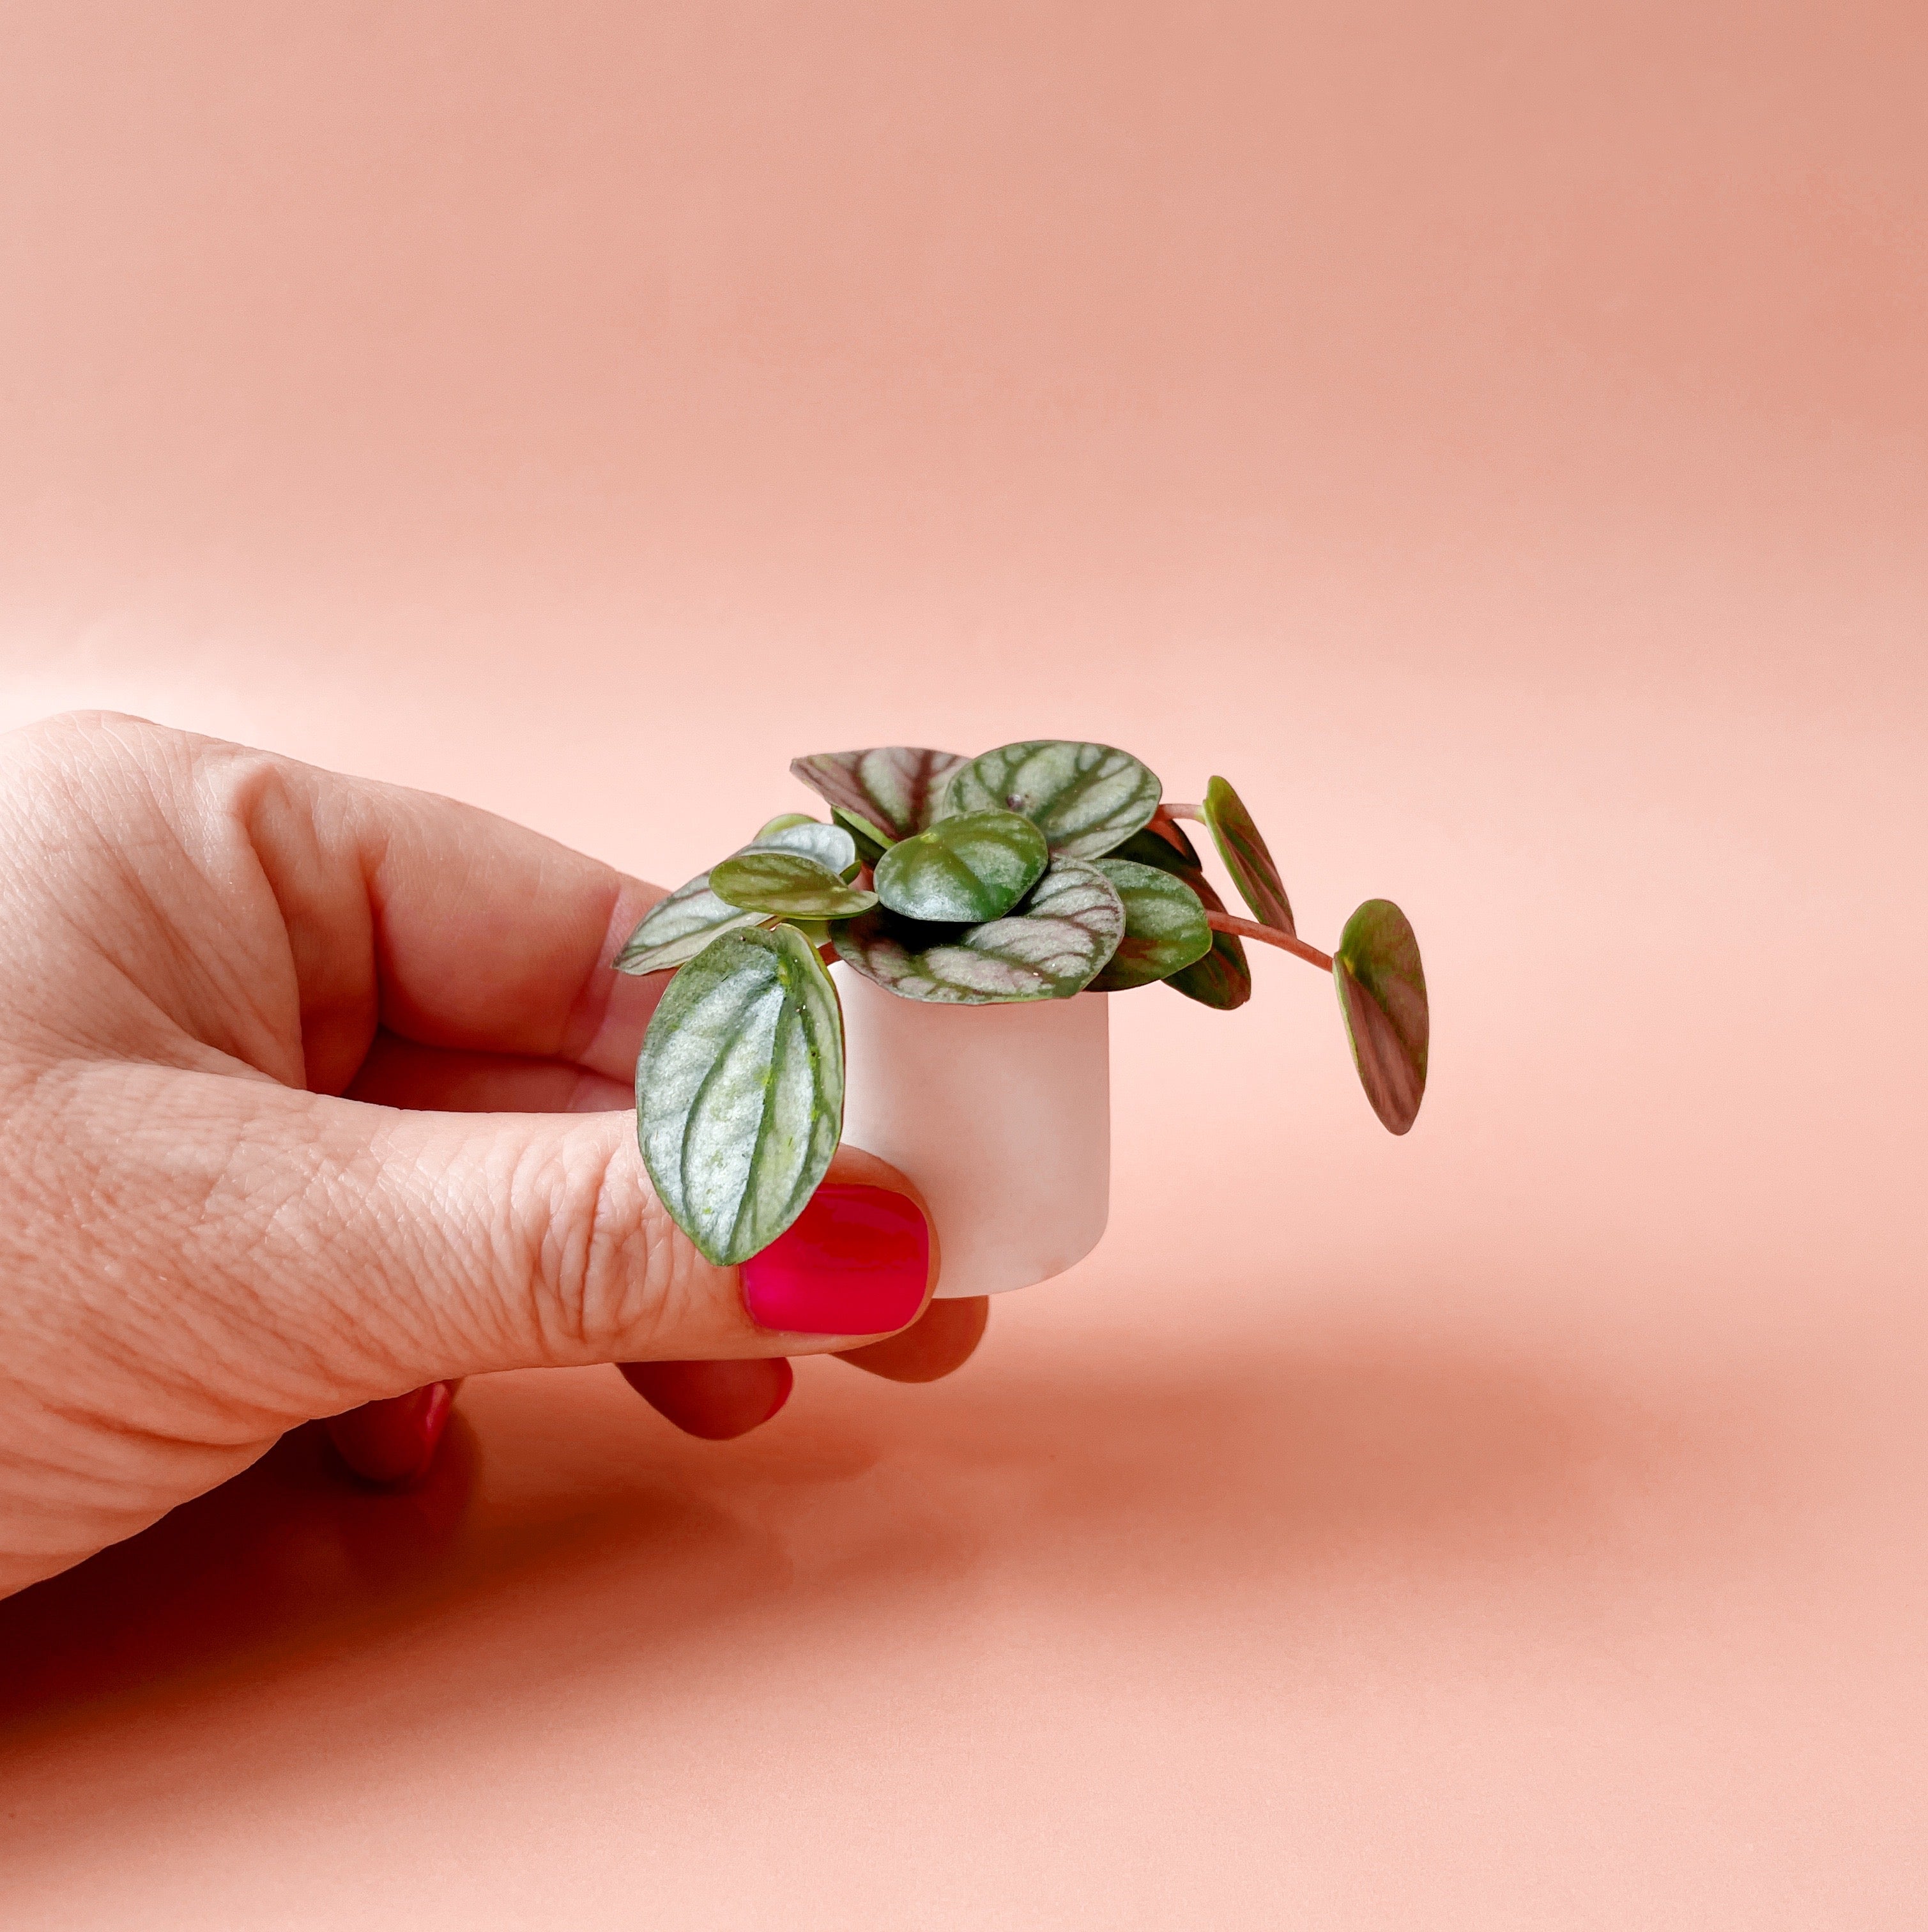 On a pink background is a white ceramic pot being held by a model filled with tiny stems of plants. 